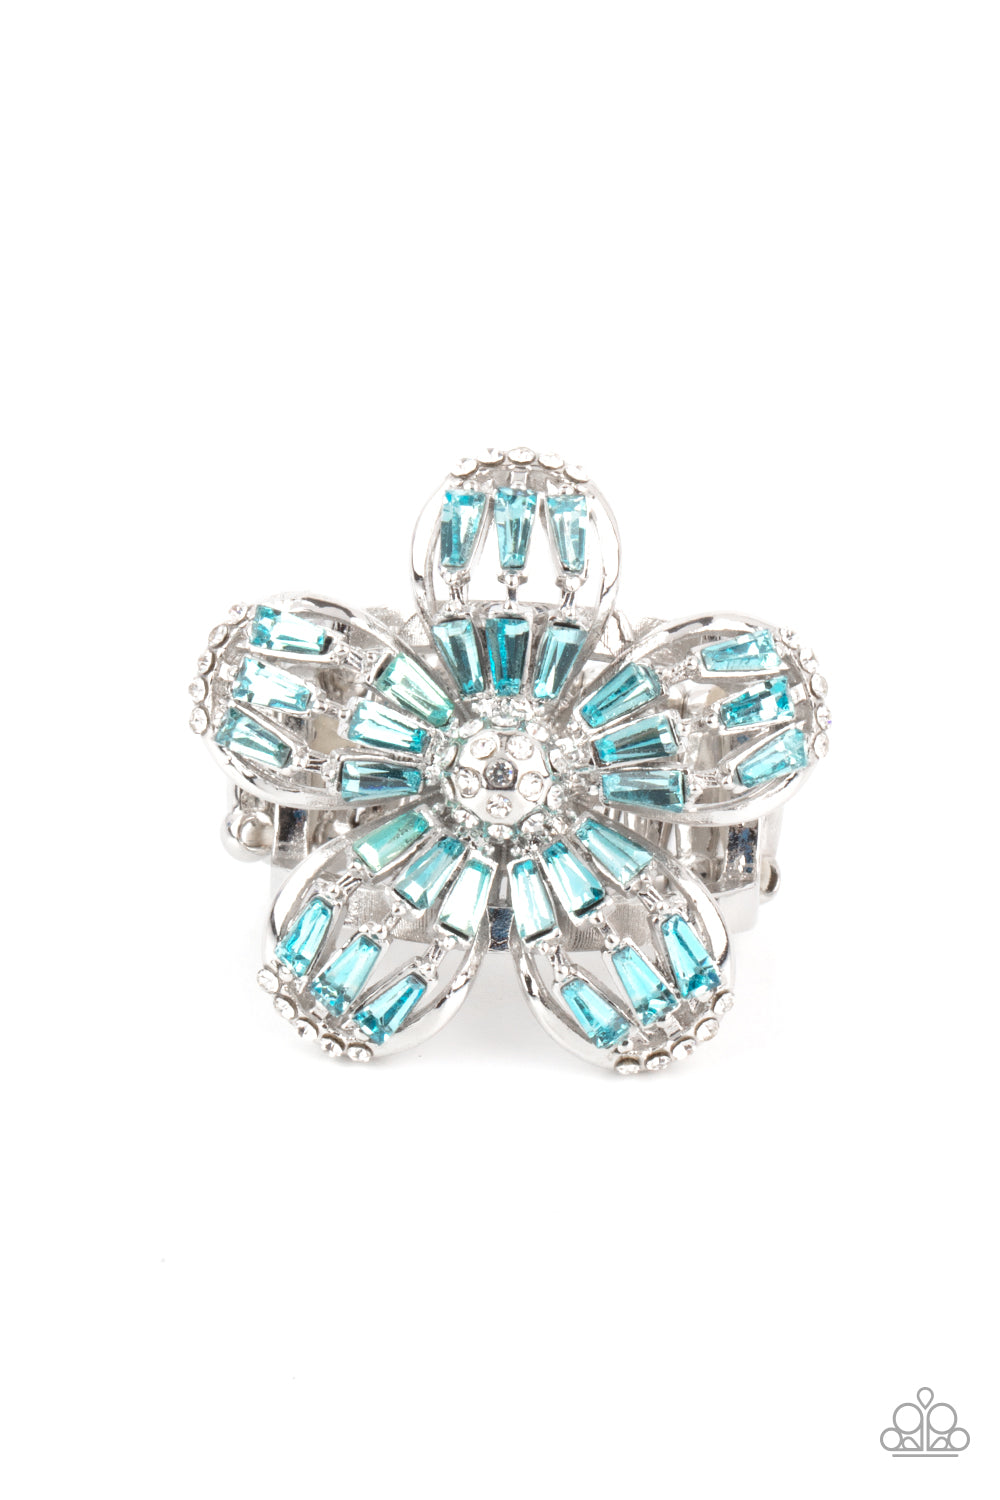 Botanical Ballroom Blue Ring - Paparazzi Accessories  Blue emerald-style rhinestones adorn the silver petals of a blooming flower featuring a white rhinestone encrusted beaded center. The tips of the colorful petals are dusted in dainty white rhinestones, adding extra shimmer to the sparkly centerpiece. Features a stretchy band for a flexible fit.  All Paparazzi Accessories are lead free and nickel free!  Sold as one individual ring.